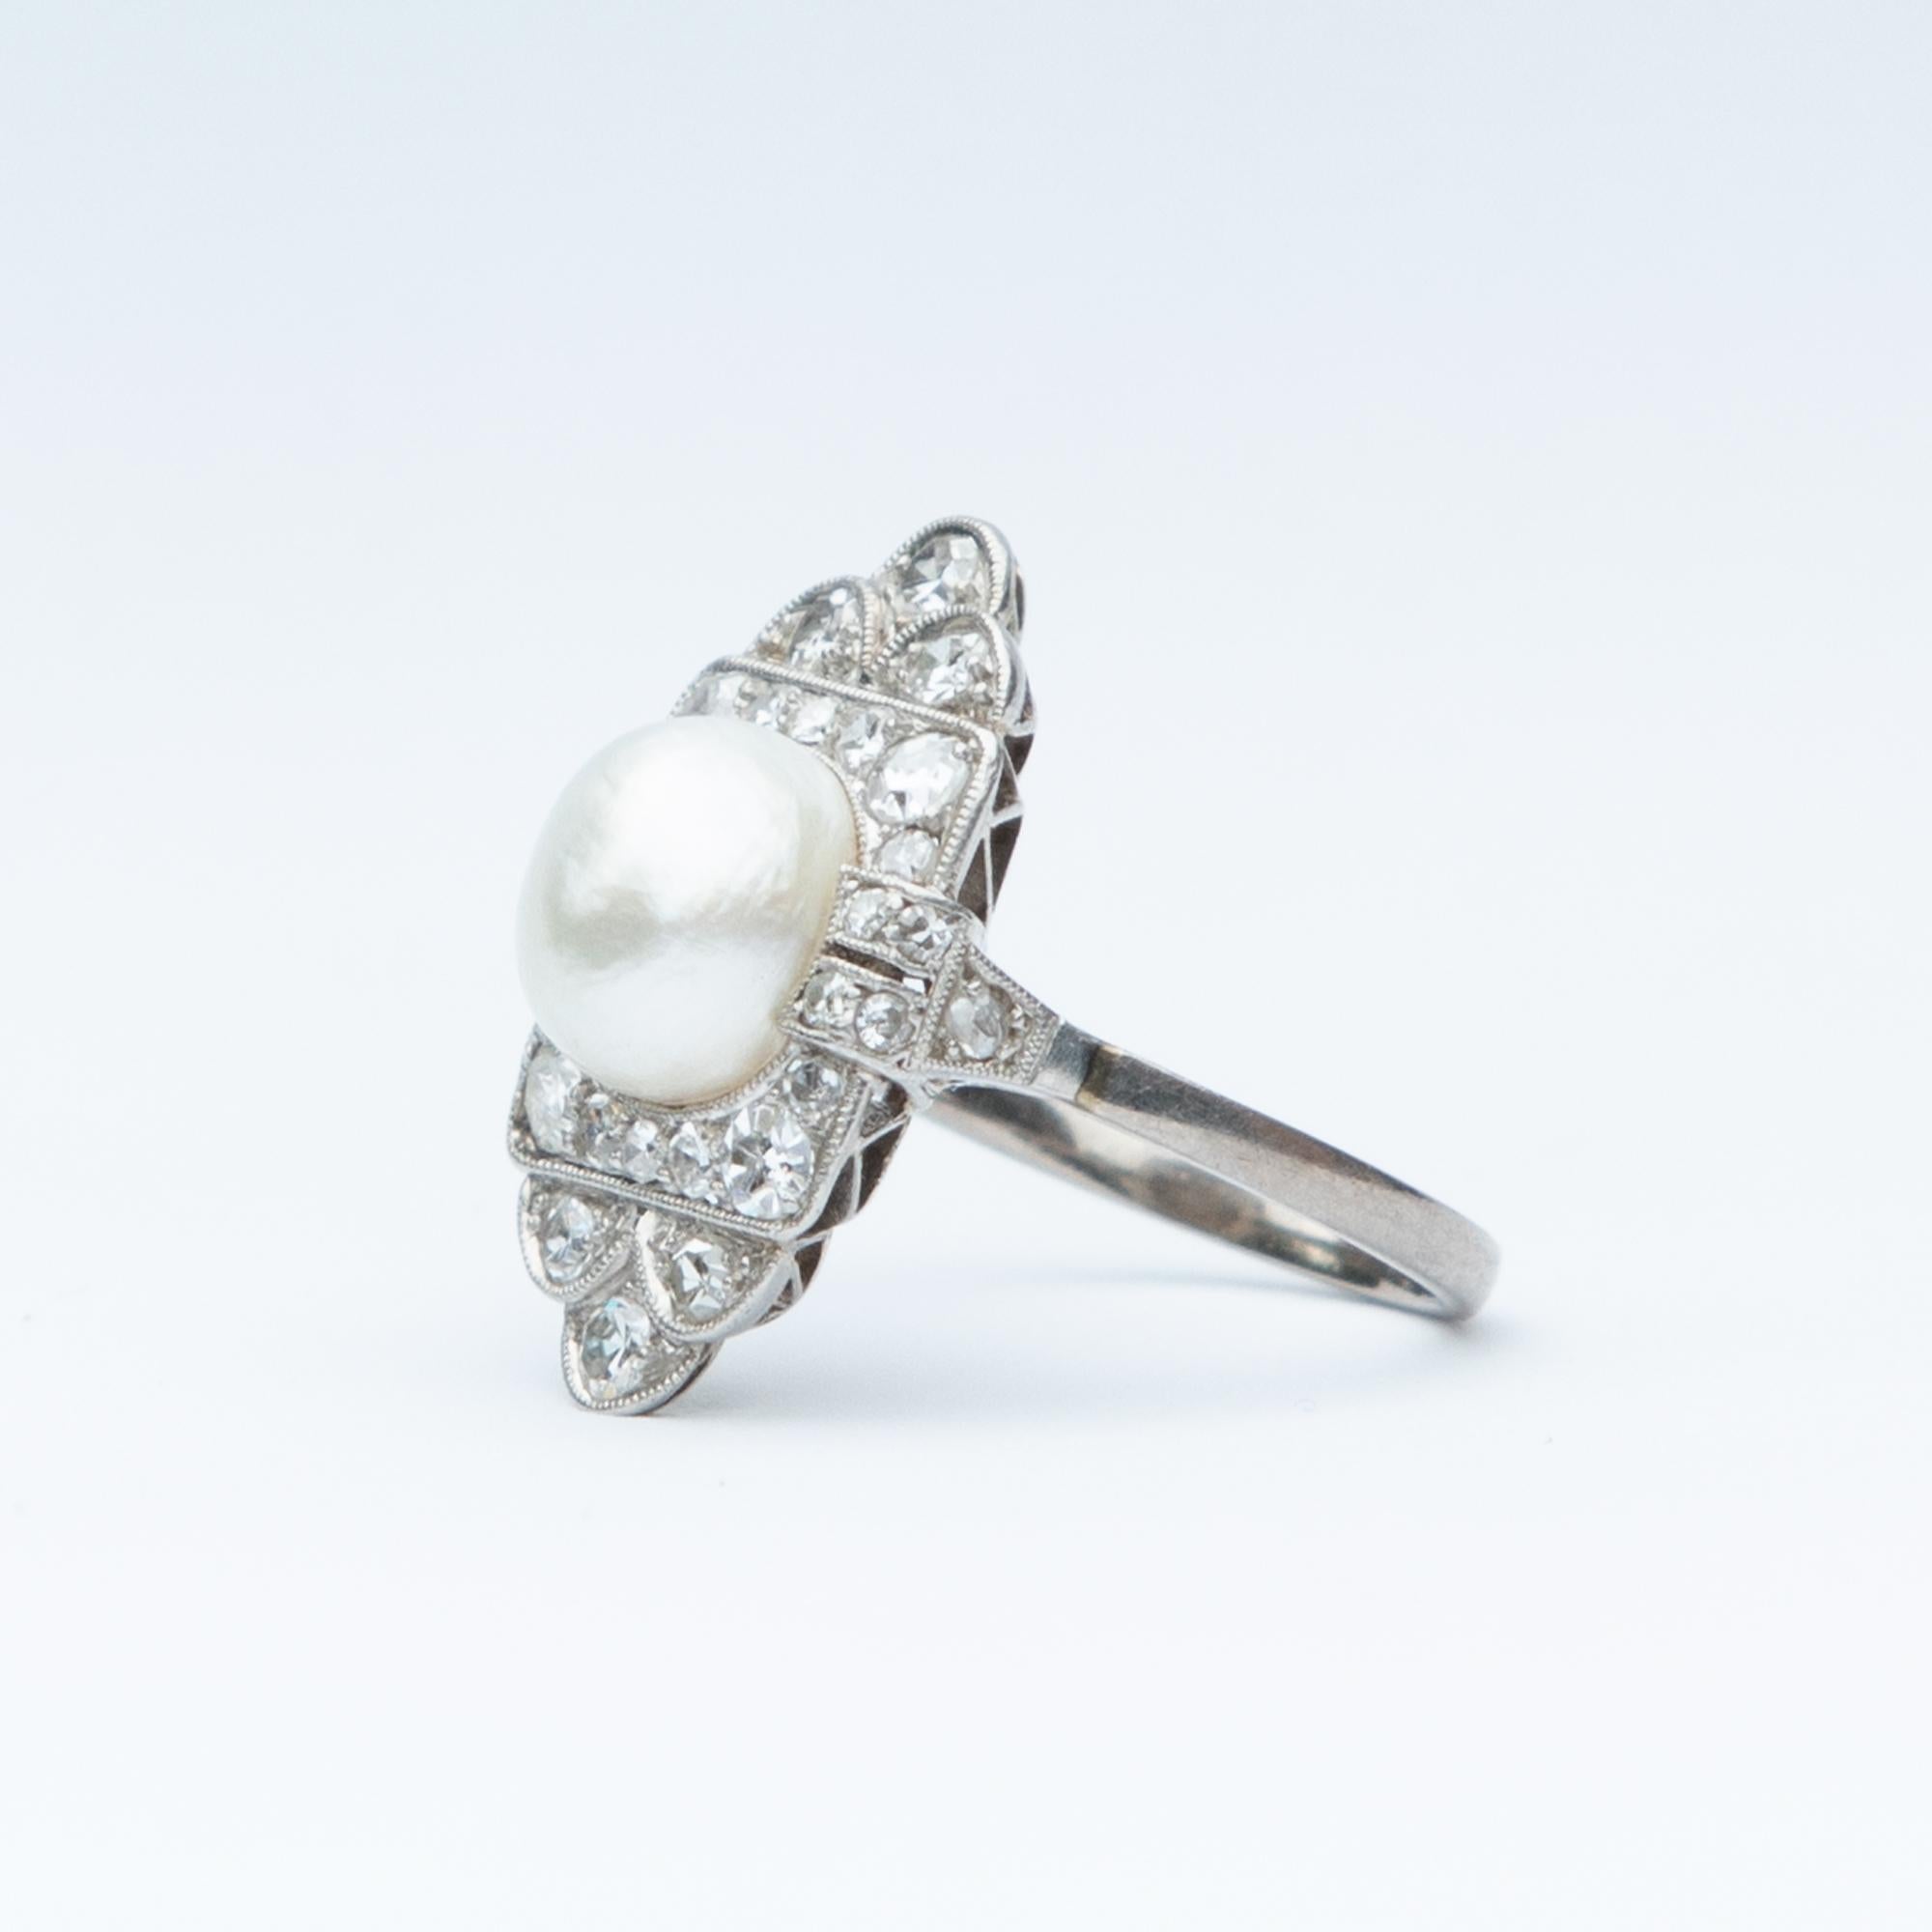 A stunning example of an Art Deco Panel Ring. Set in platinum with a central exquisite quality natural pearl surrounded by diamonds. Total diamond weight certified 0.98 carat, H colour and clarity SI-2.

Head: 21.4 x 14.03

Size: M 1/2 or 6.5 

